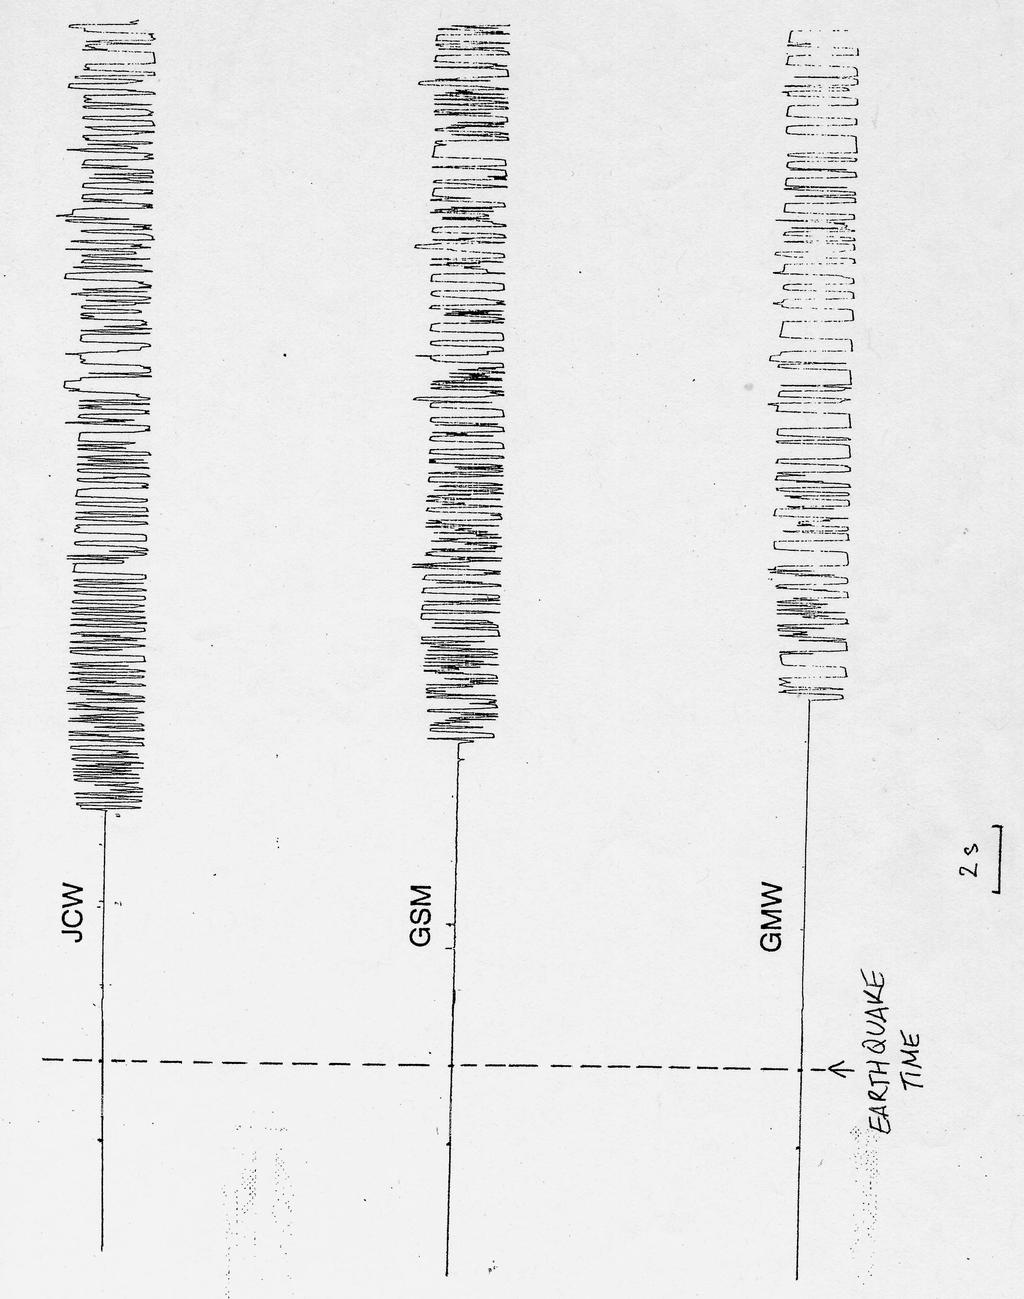 Figure 11-2 Seismograms from seismic stations JCW, GSM and GMW.